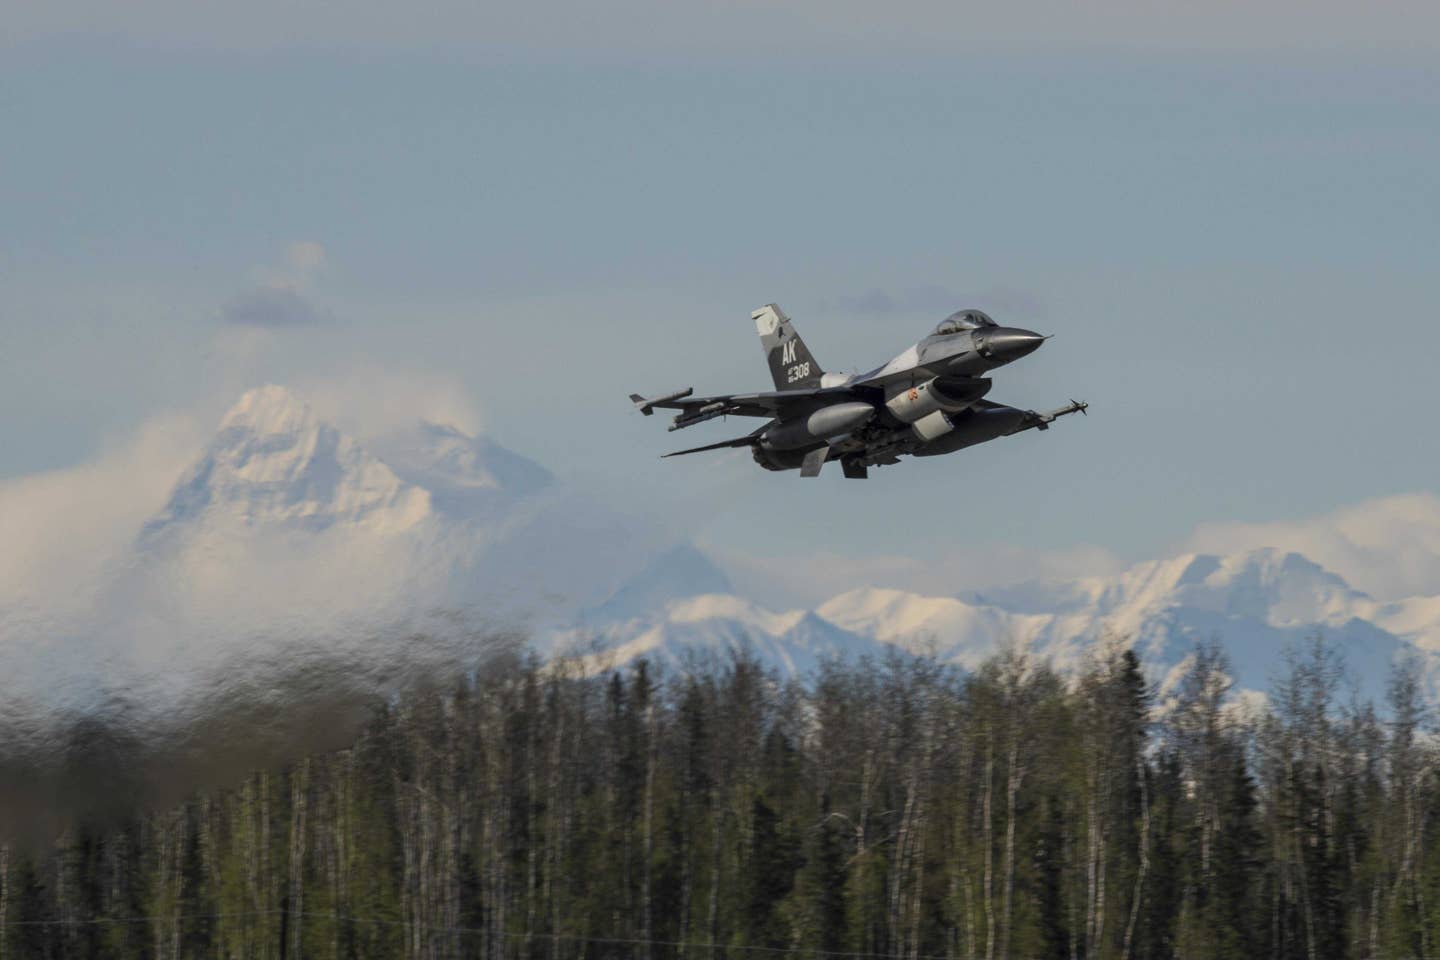 A U.S. Air Force F-16 Fighting Falcon assigned to the 18th Aggressor Squadron at Eielson Air Force Base, Alaska, May 4, 2016, takes off from the base during RED FLAG-Alaska (RF-A) 16-1. Aggressor pilots are trained to act as opposing forces in exercises like RF-A to better prepare U.S. and allied forces for aerial combat. (U.S. Air Force photo by Staff Sgt. Joshua Turner)